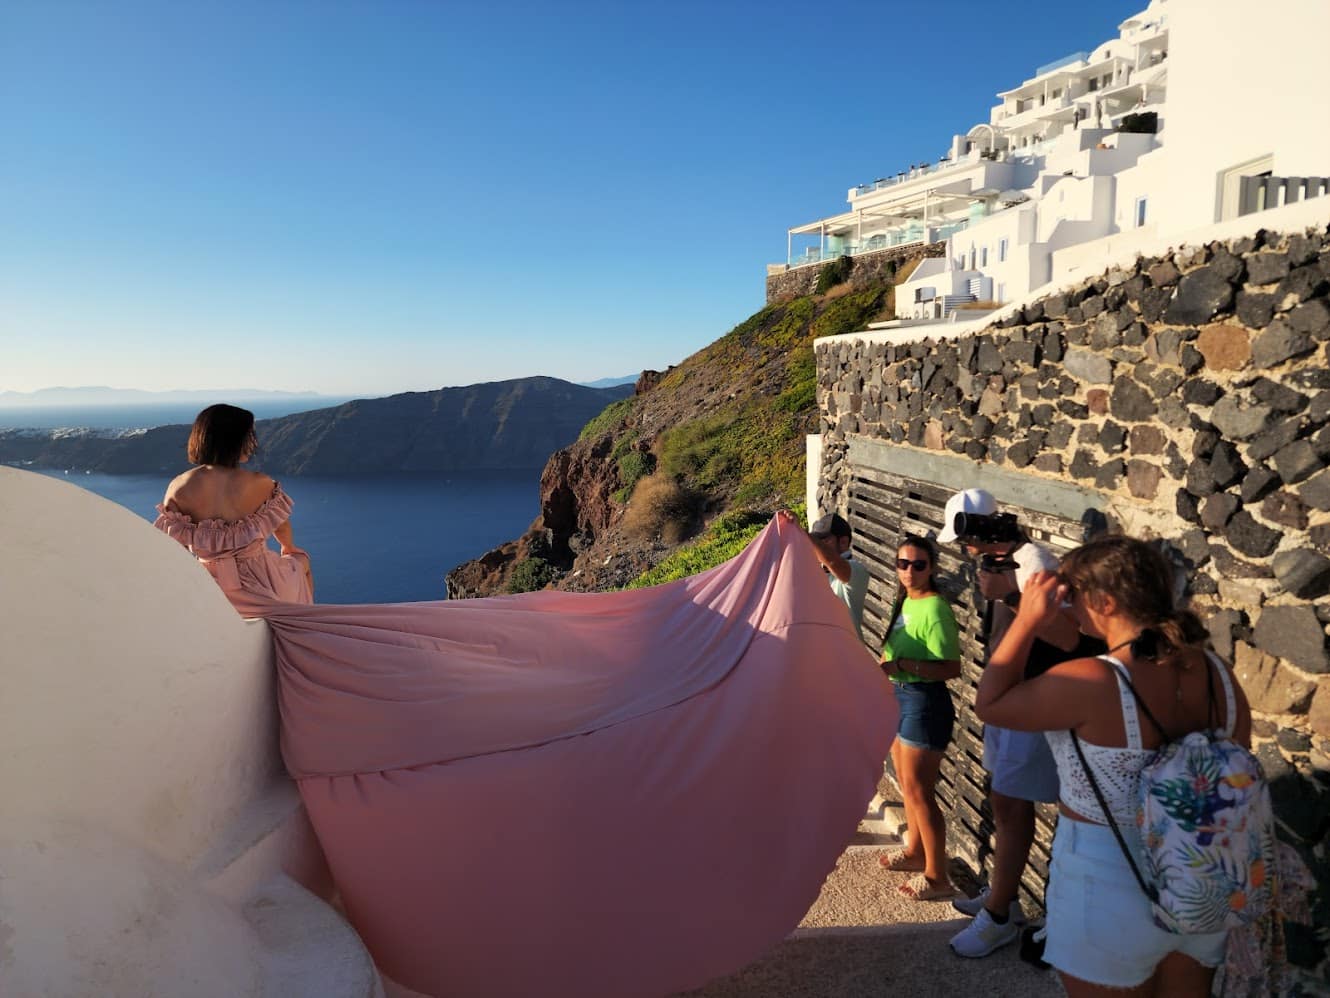 The crowds waiting while I take a photo in Santorini